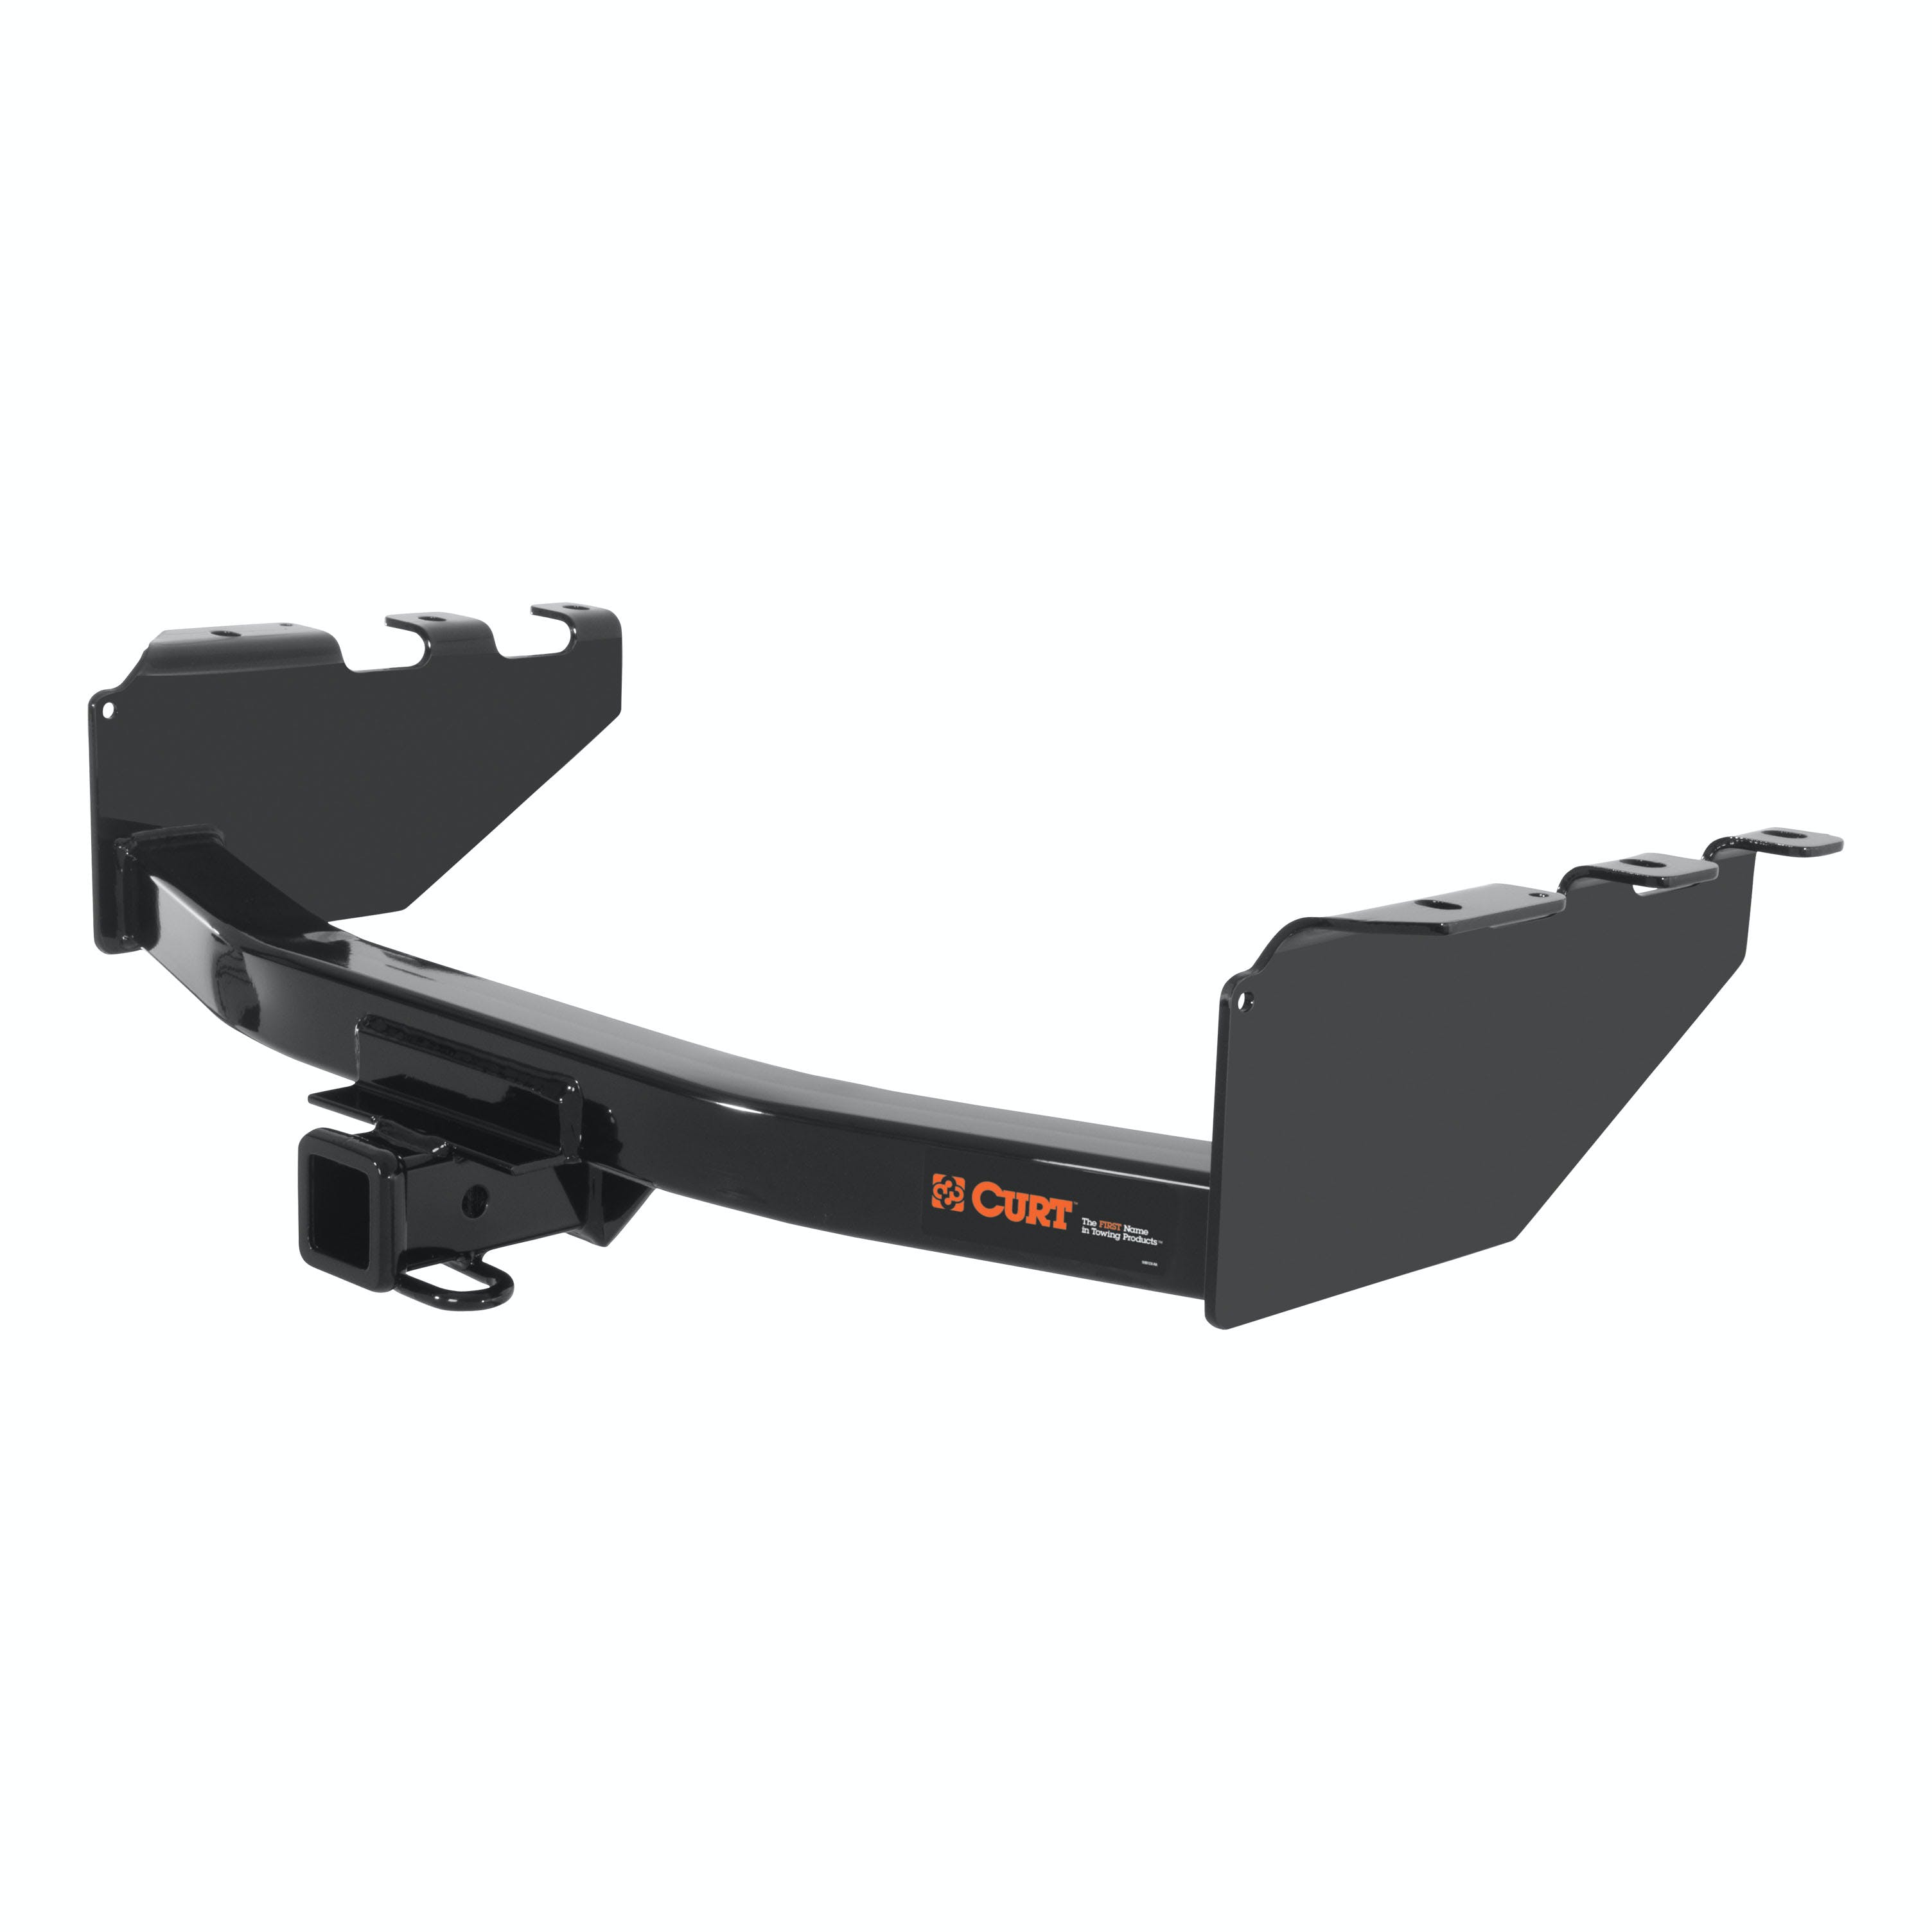 CURT 13301 Class 3 Hitch, 2 Receiver, Select Silverado, Sierra 1500 (Concealed Main Body)